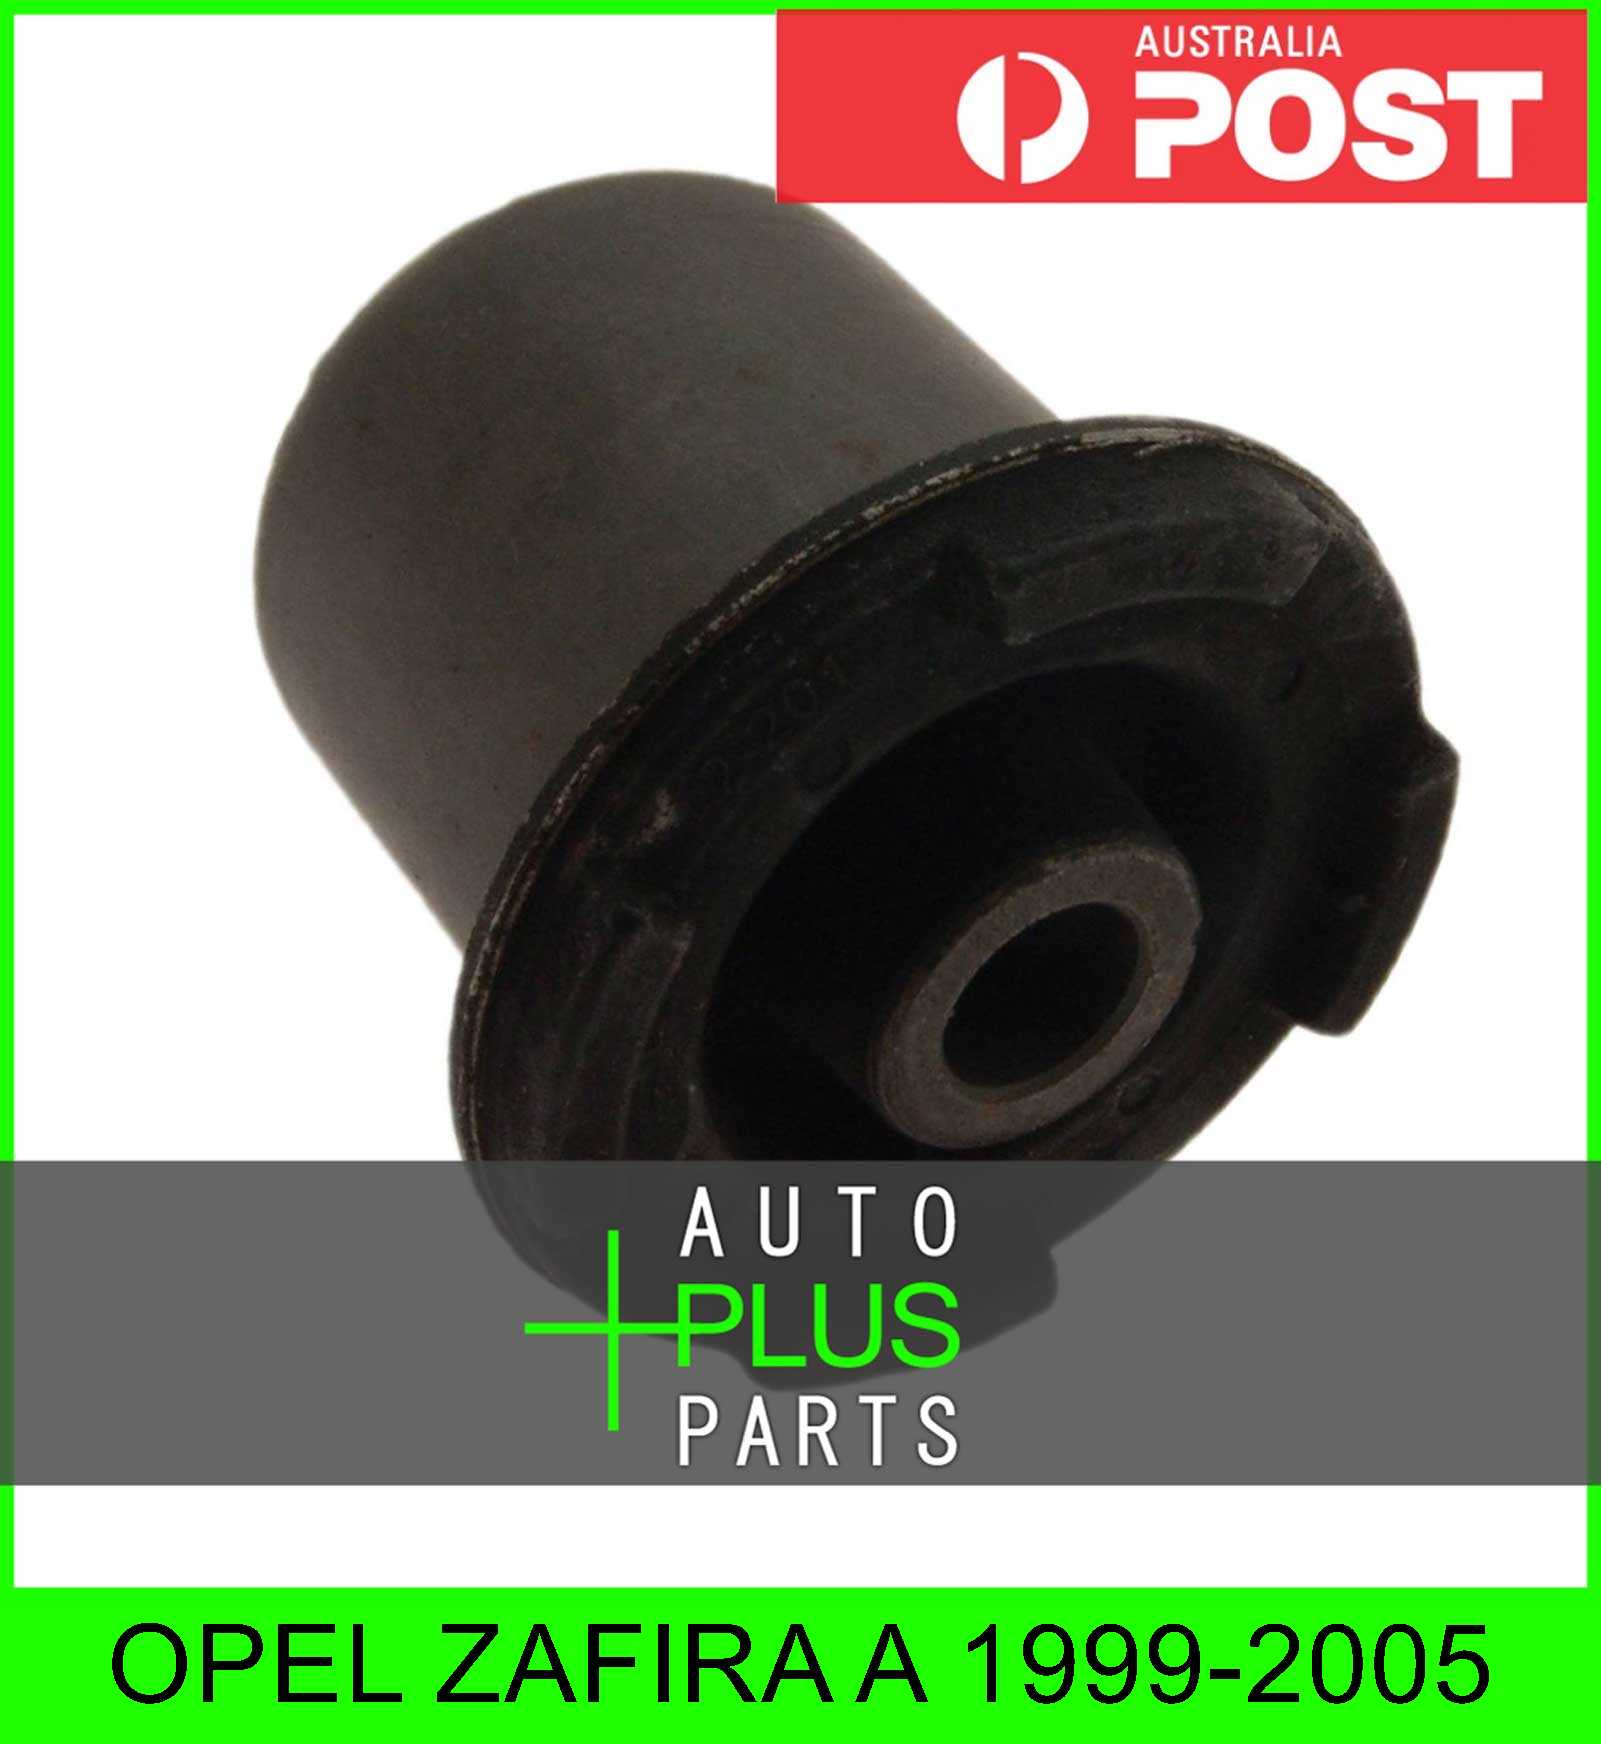 Fits OPEL ZAFIRA A 1999-2005 - Rear Rubber Bush Front Arm Wishbone Suspension Product Photo